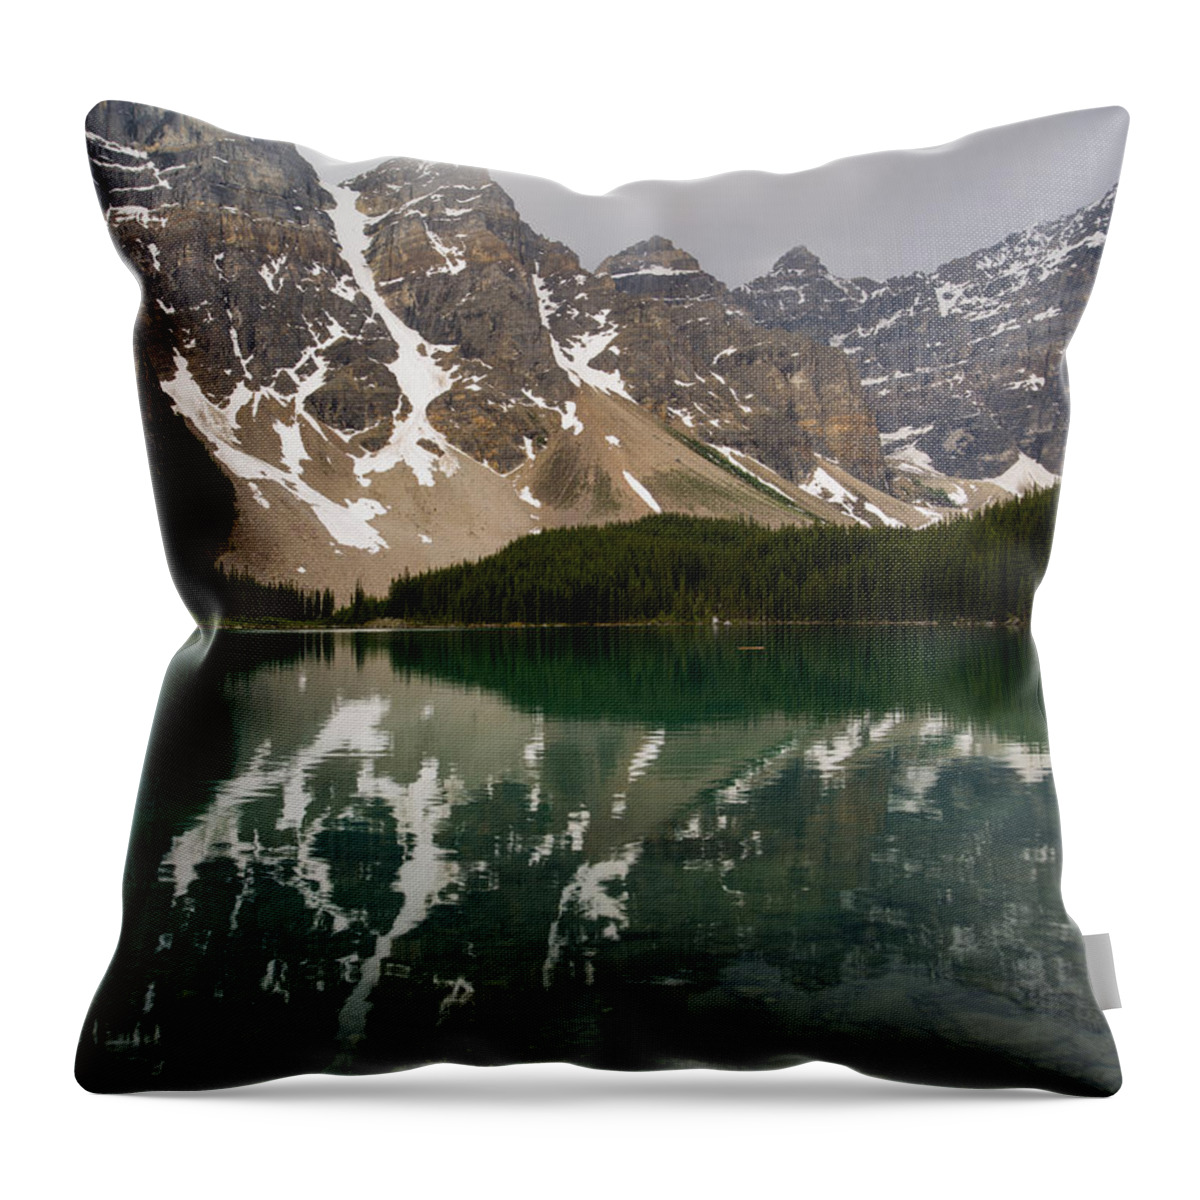 & Wenkchemna Peaks Throw Pillow featuring the photograph Moraine Lake 2 by Tracy Knauer